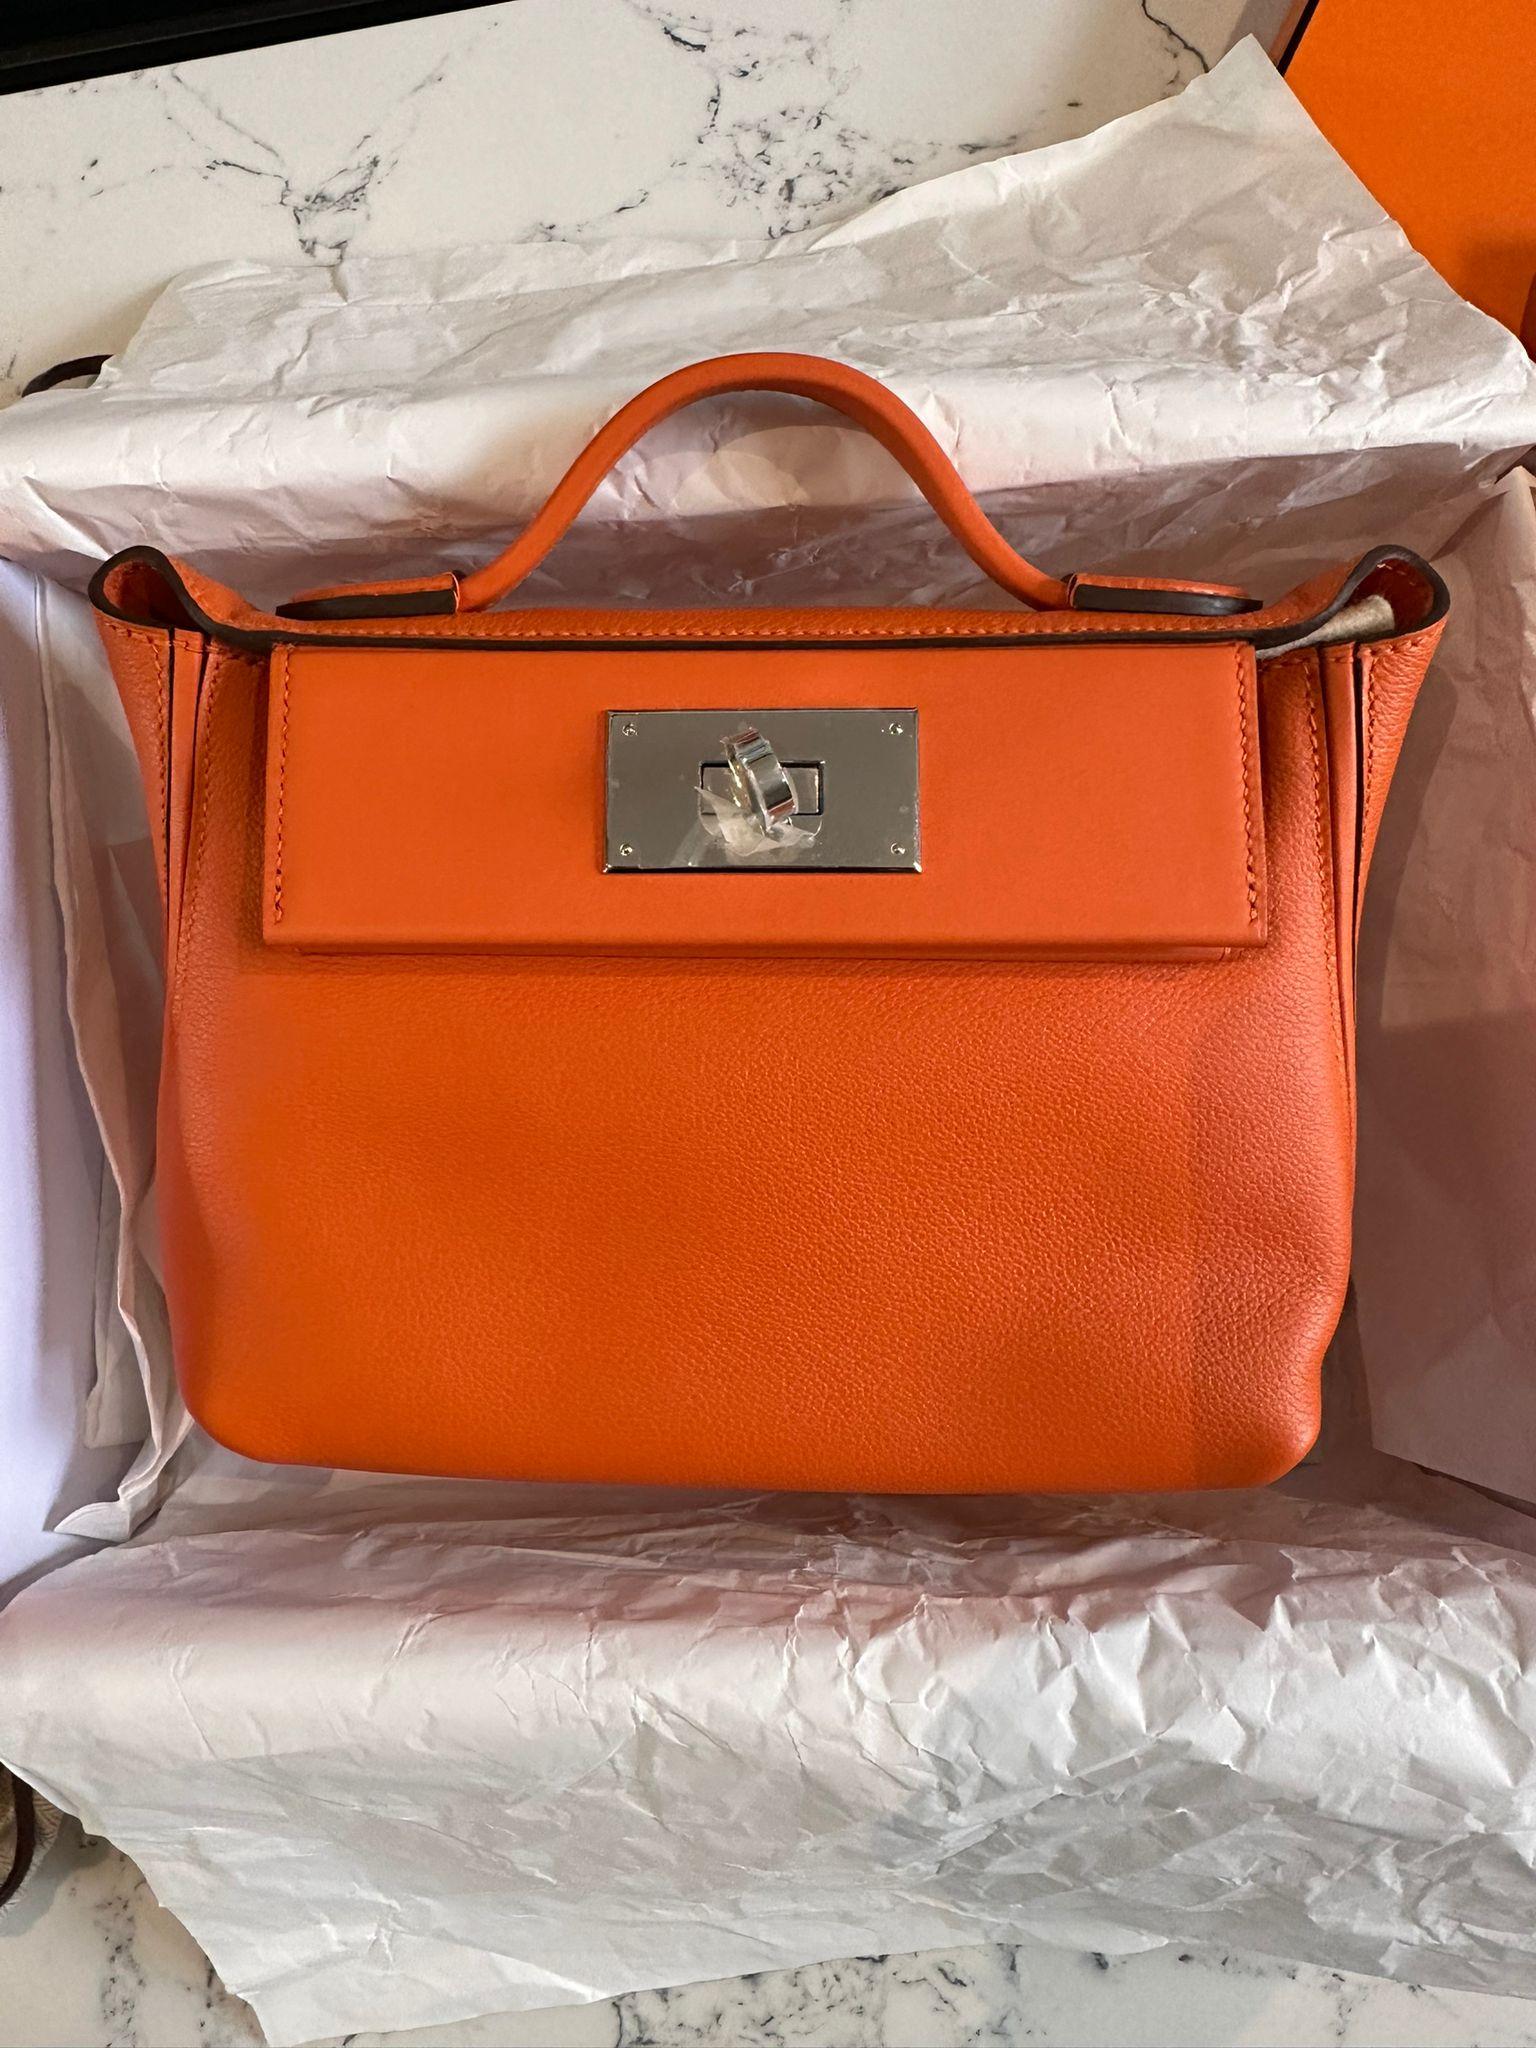 HERMÈS 24/24 - mini 21 handbag in Feu Evercolor leather with Palladium hardware. Brand new in box. B stamp 2023. Everything included. 